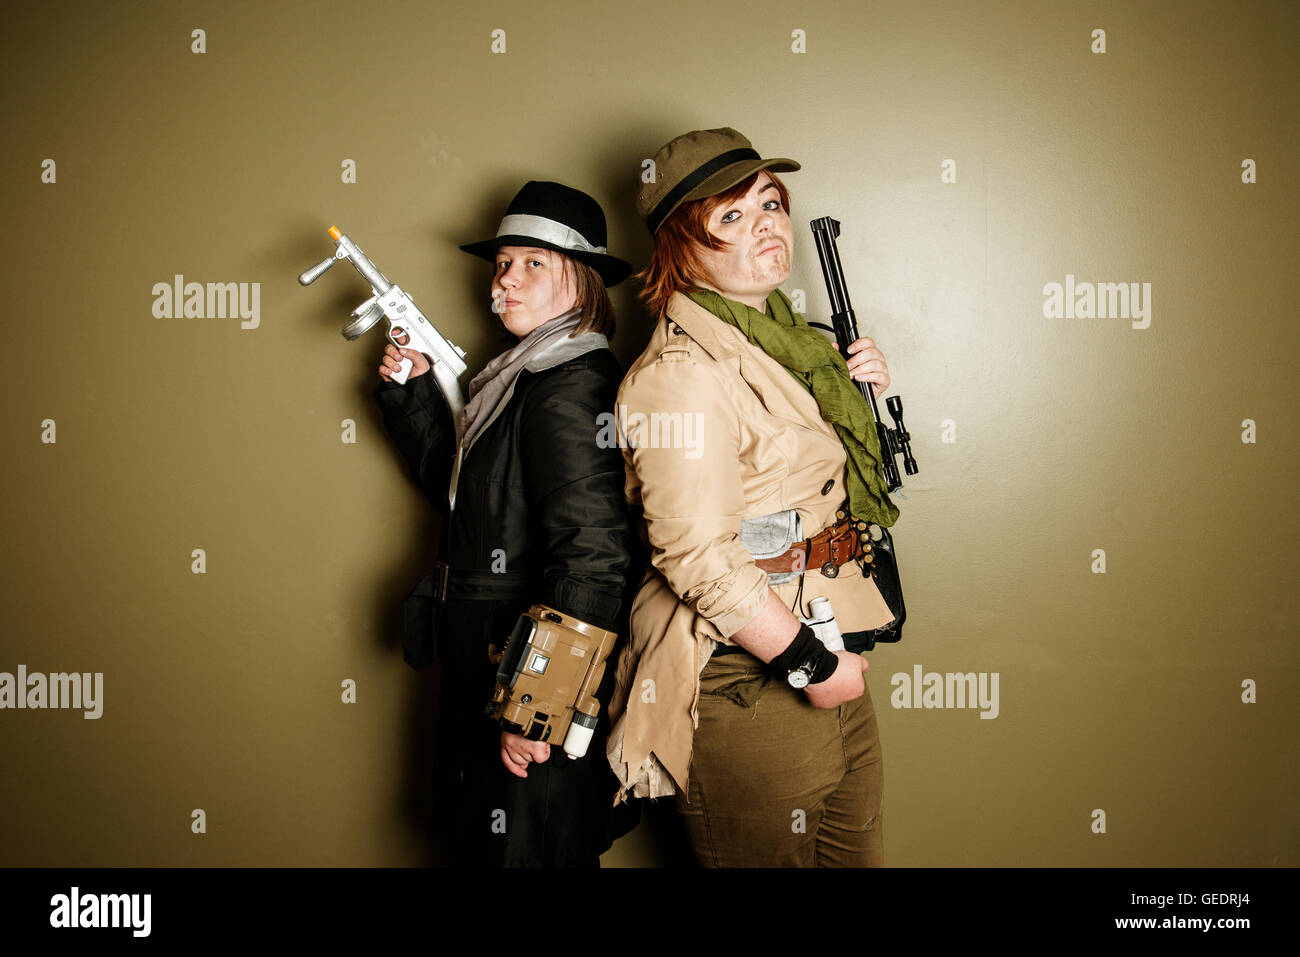 https://c8.alamy.com/comp/GEDRJ4/two-female-cosplayers-dressed-as-characters-from-the-video-game-fallout-GEDRJ4.jpg